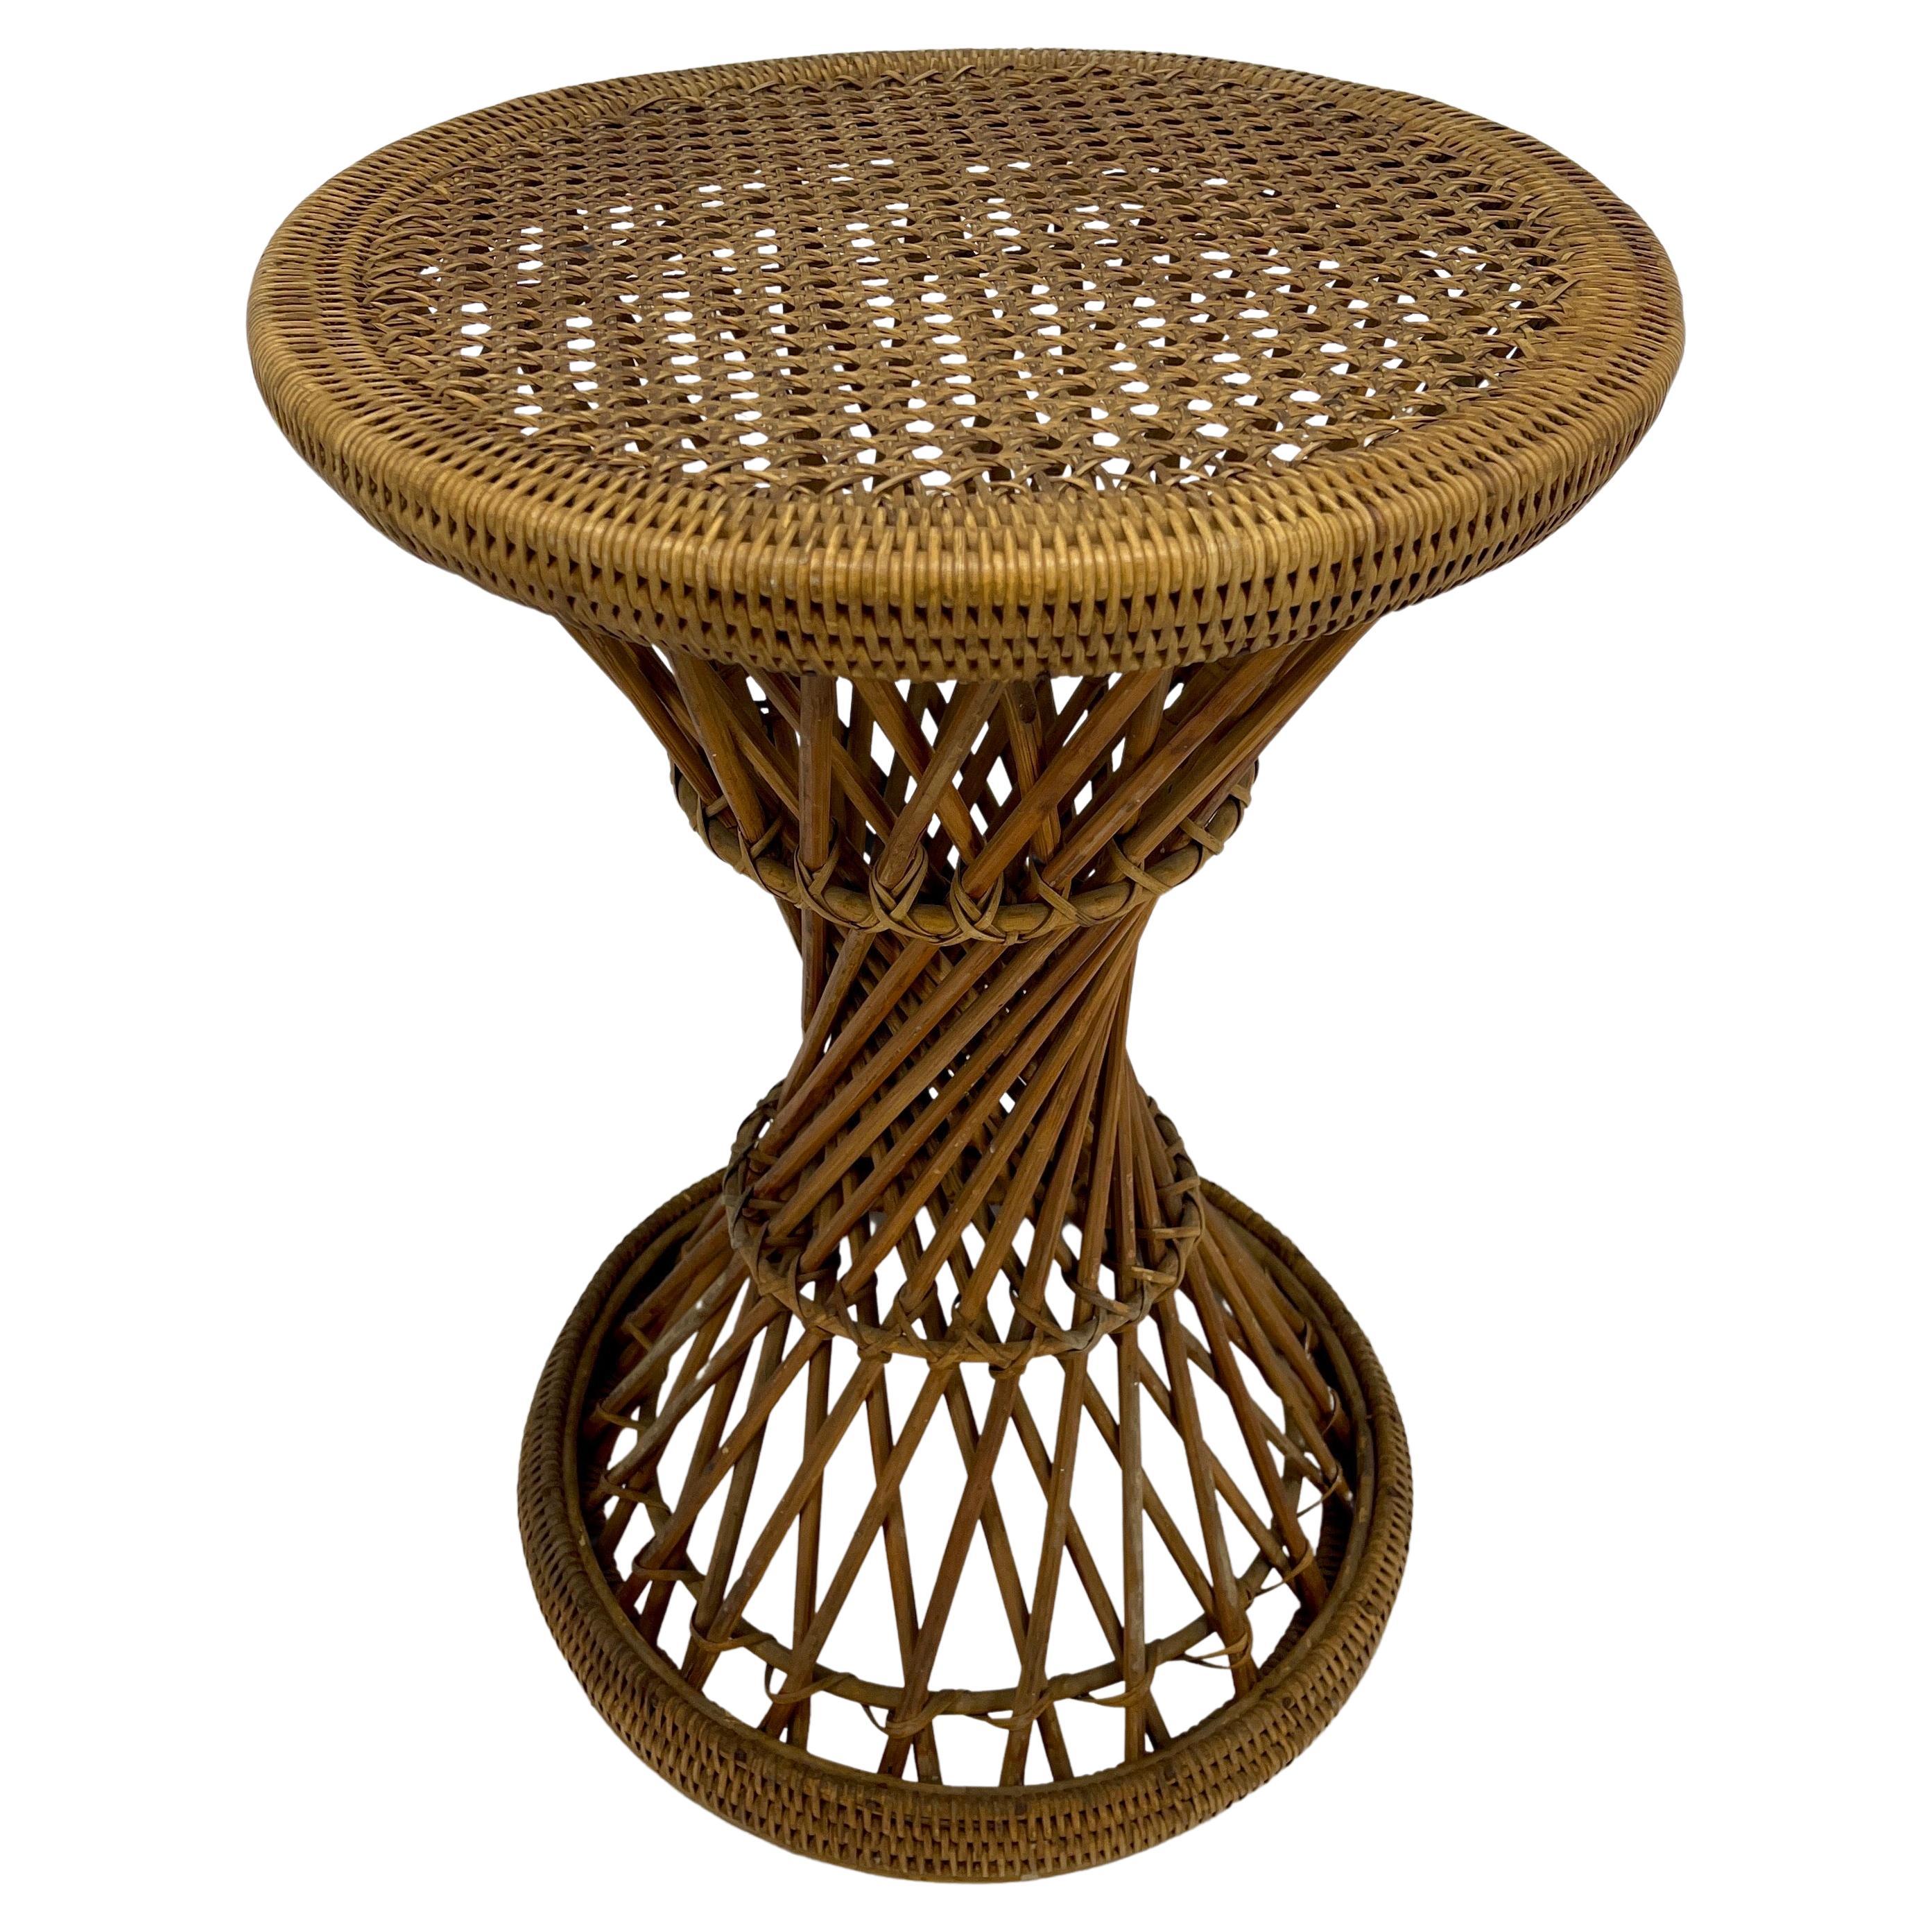 Vintage Bohemian round handcrafted wicker drum stool. The stool can also be used as a side table.